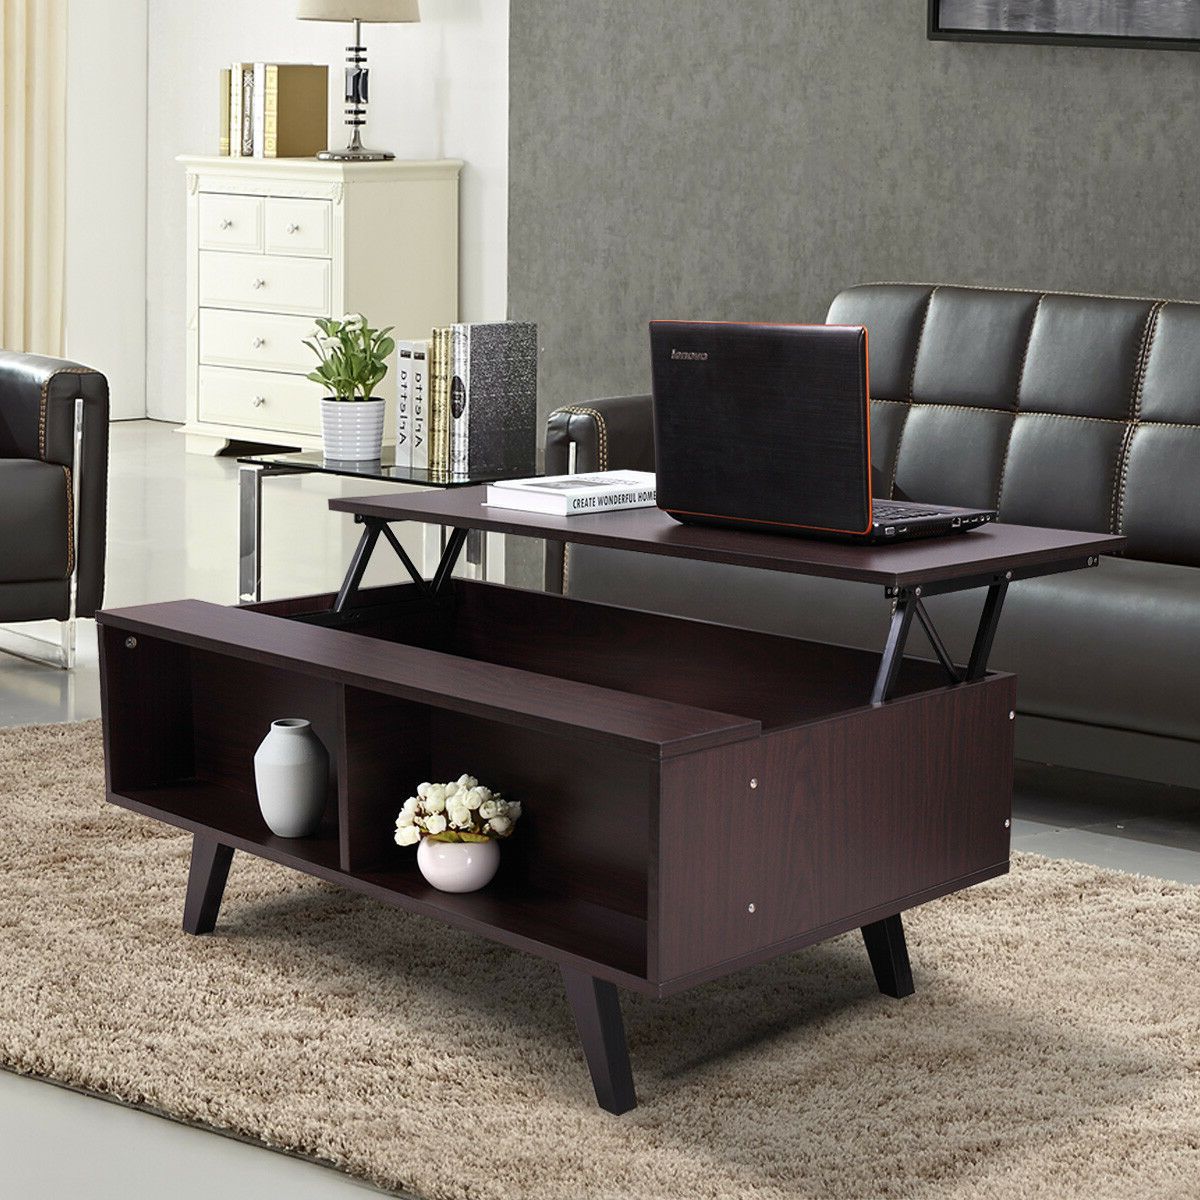 Preferred Espresso Wood Trunk Cocktail Tables With Lowestbest Lift Top Coffee Table, Wood Coffee Table (View 12 of 20)